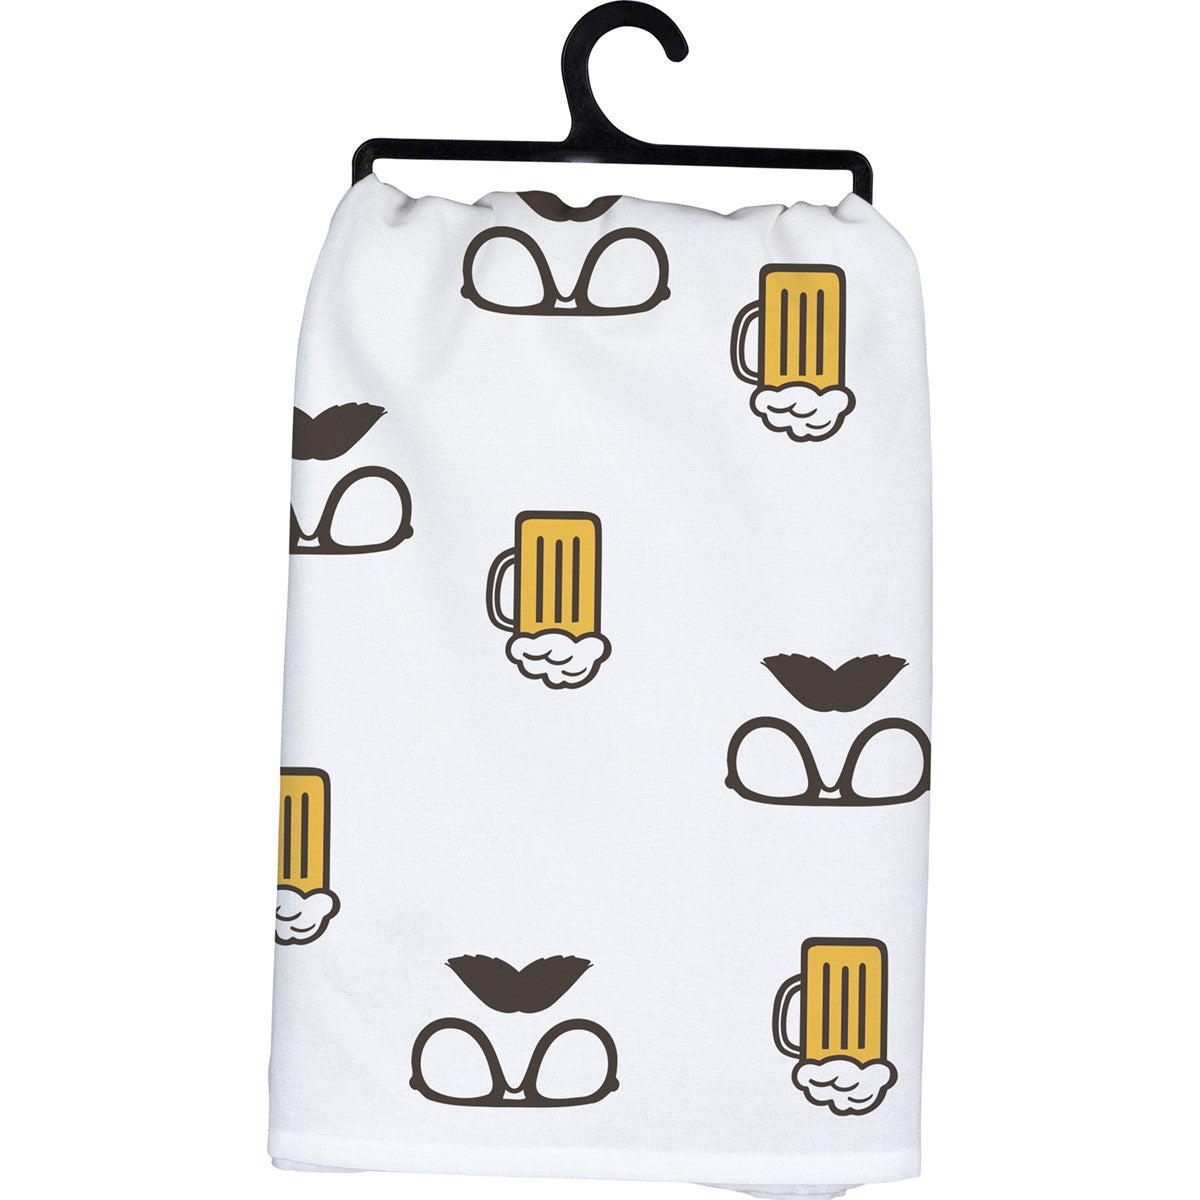 Awesome Dad Kitchen Towel